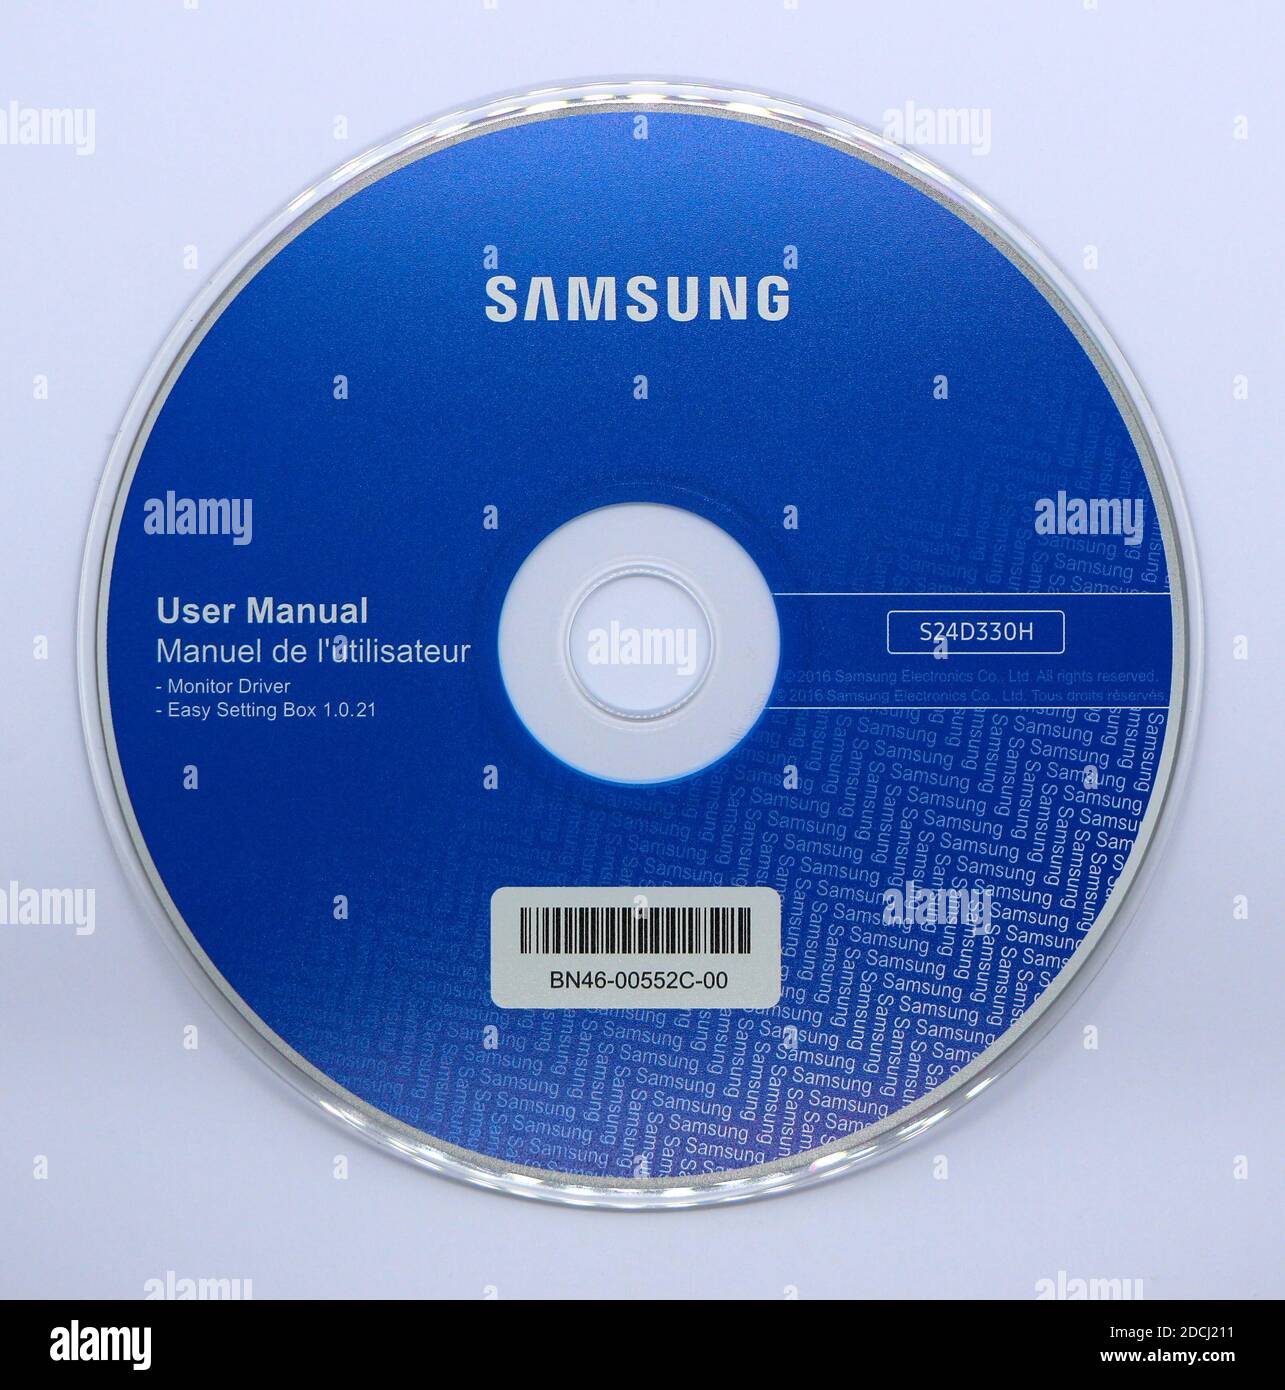 Photo of a Samsung user manual for a tv on a CD Stock Photo - Alamy